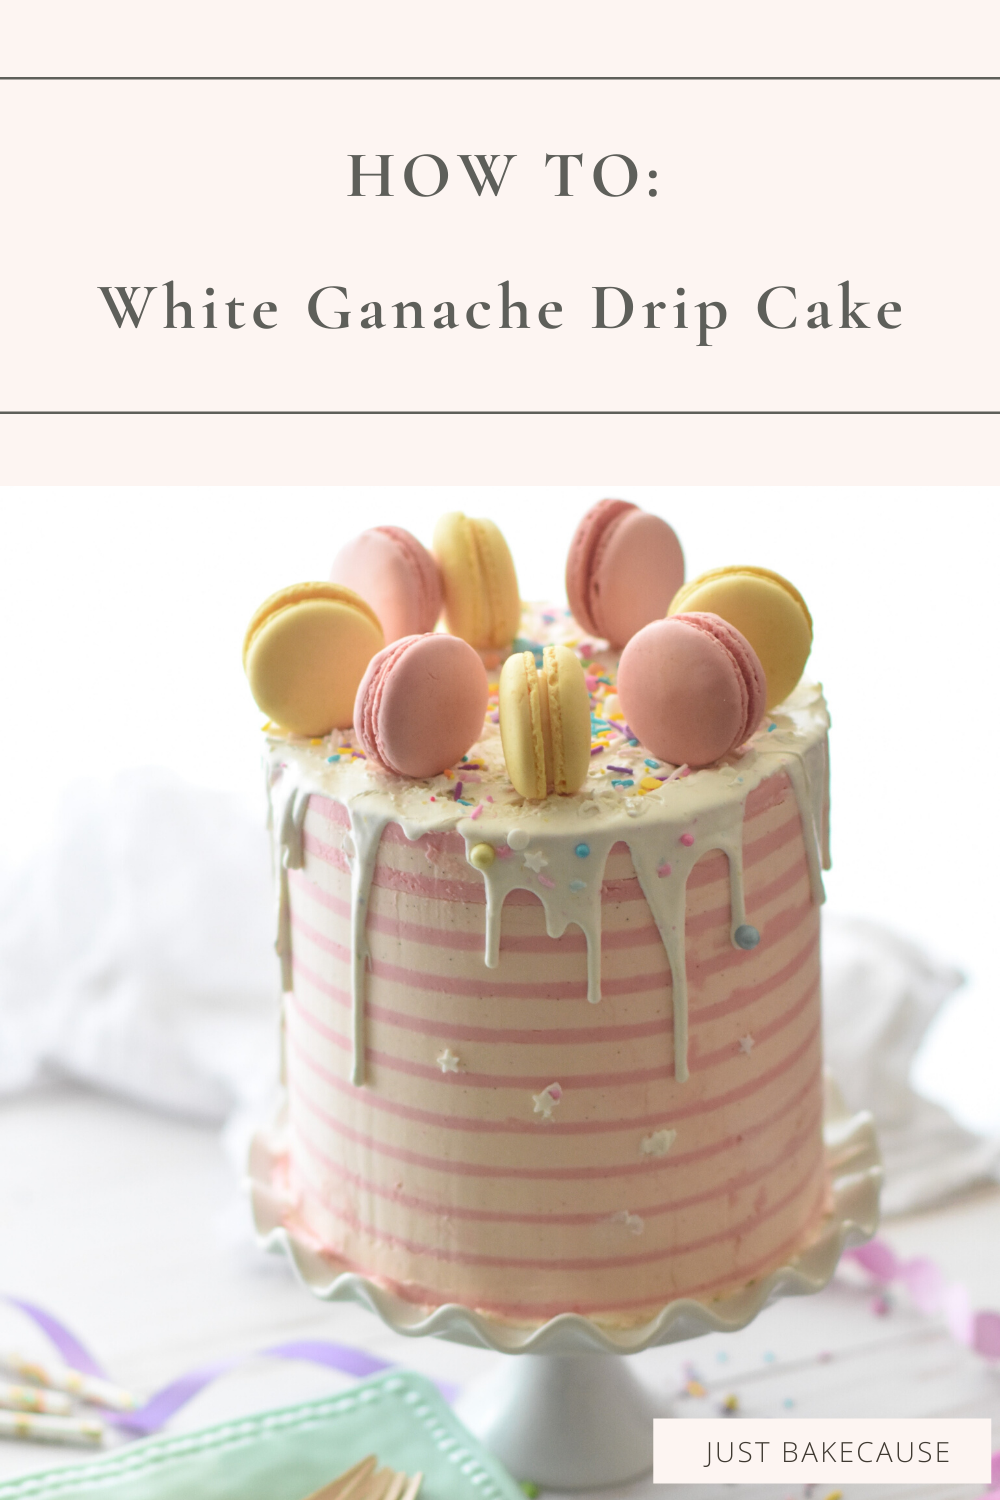 JUST BAKECAUSE — How to: 2 Ingredient White Ganache Drip